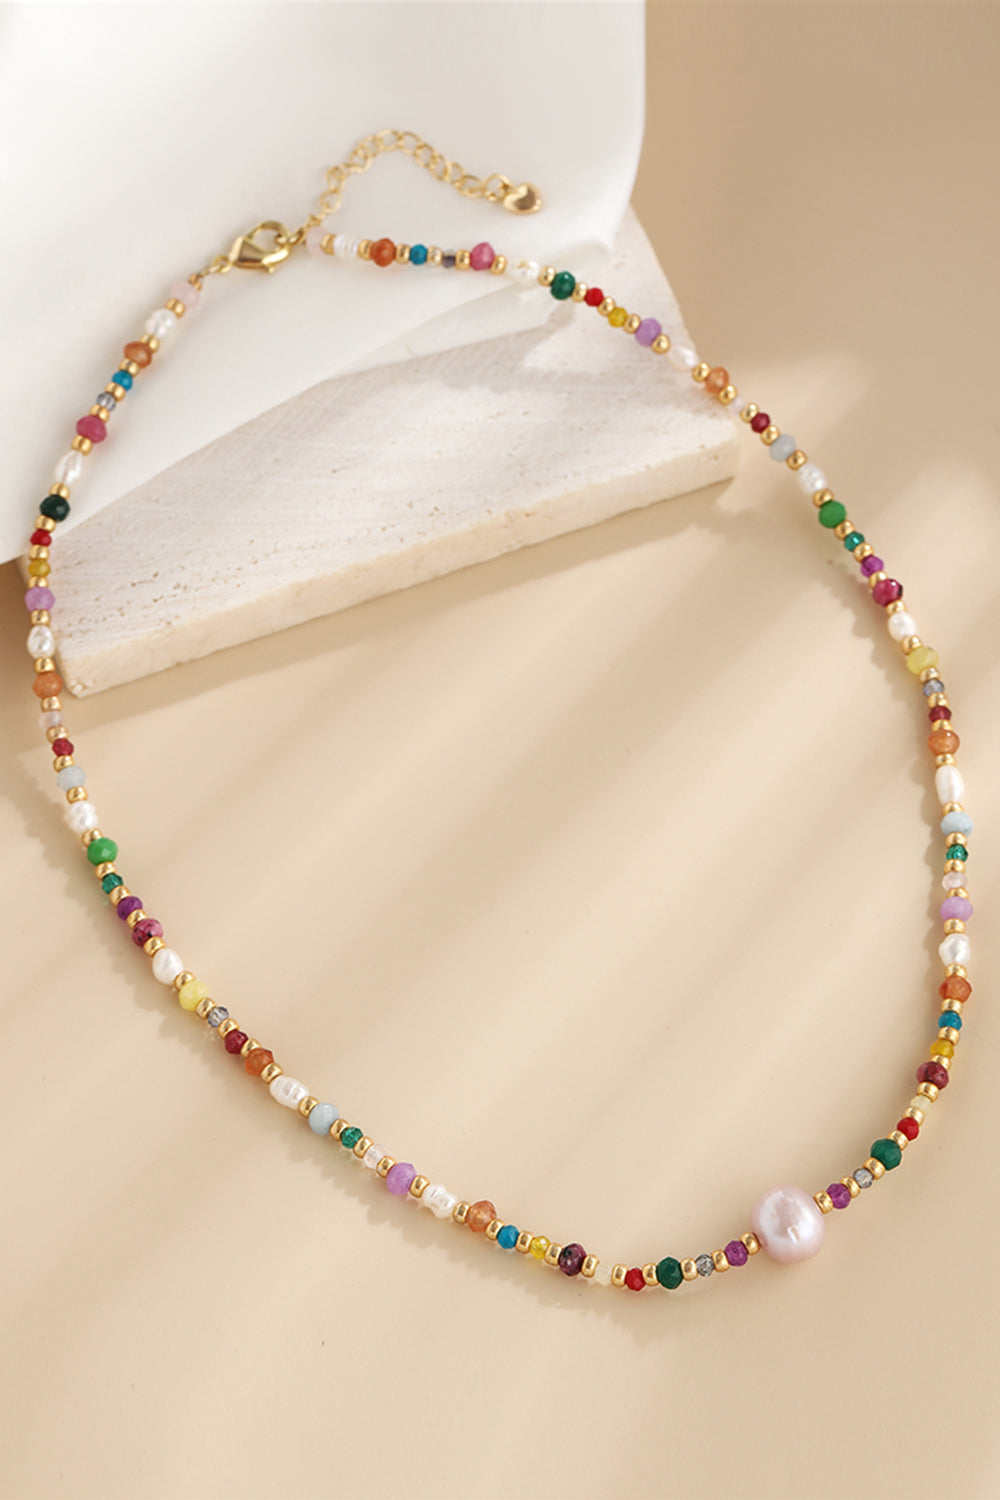 Wheat Multicolored Bead Necklace Sentient Beauty Fashions jewelry